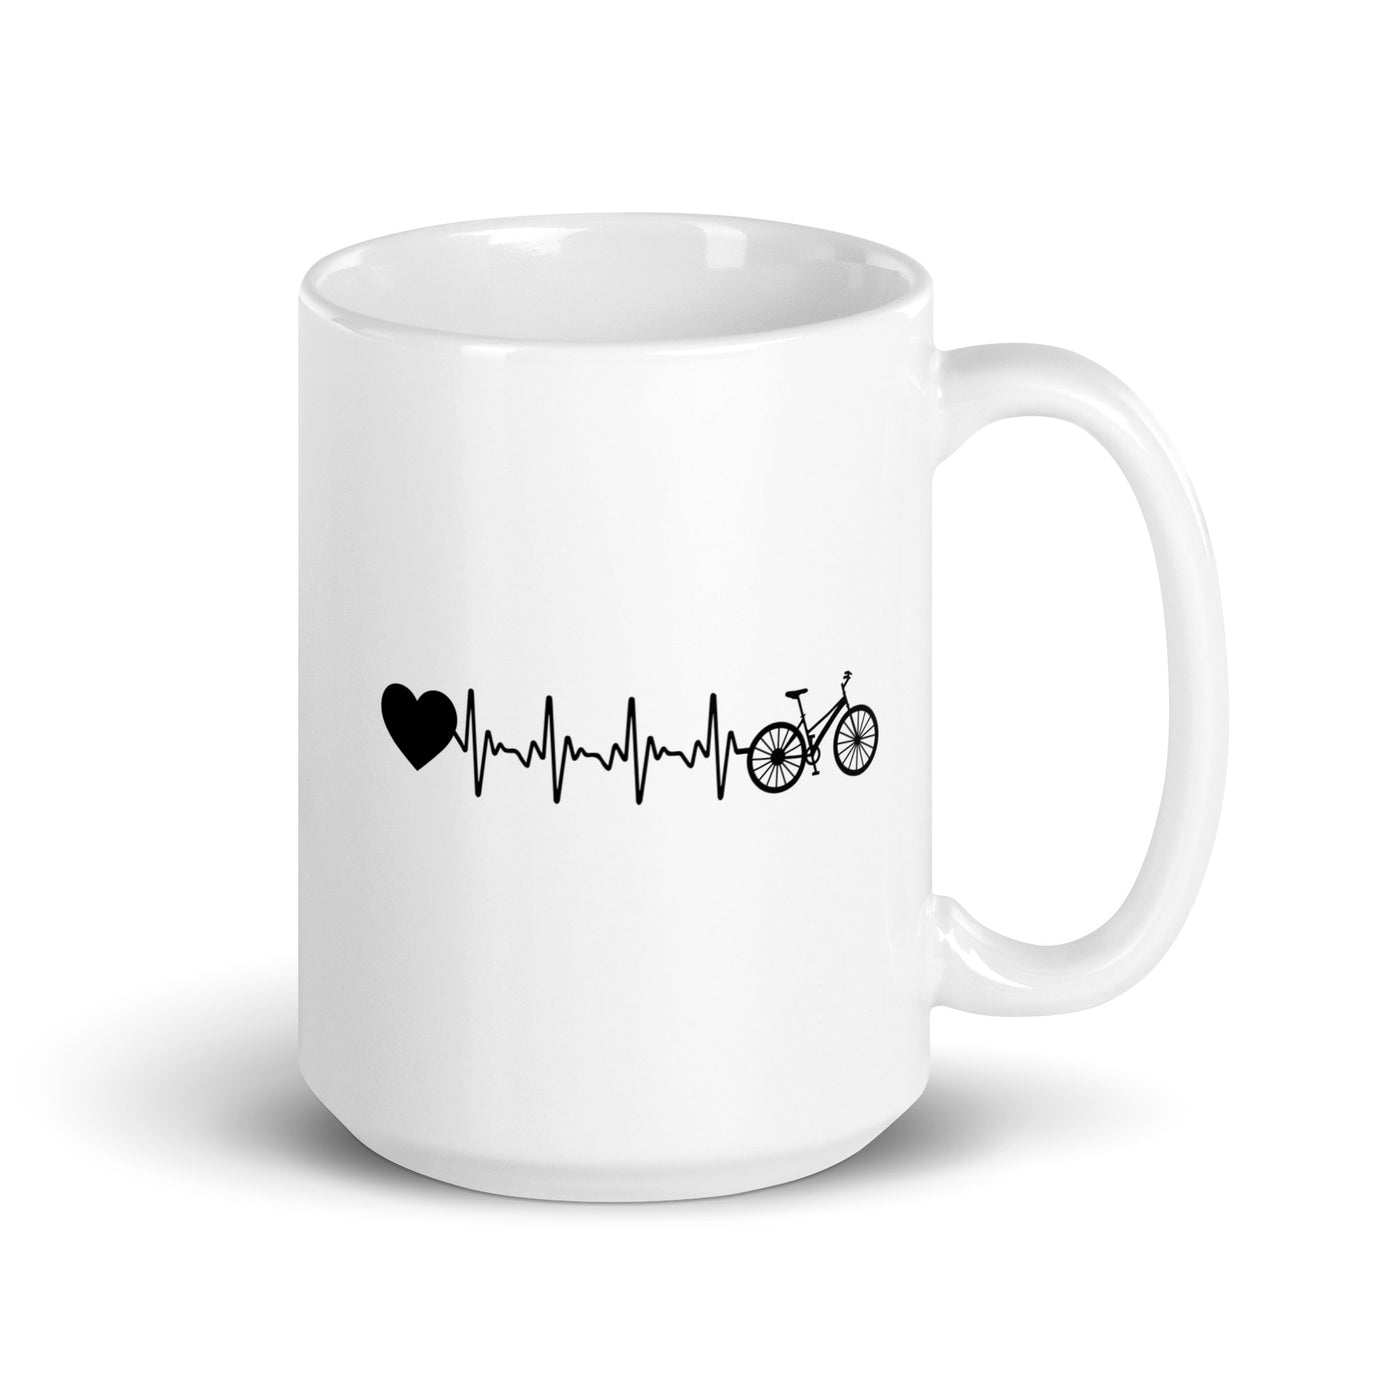 Heartbeat Heart And Bicycle - Tasse fahrrad 15oz